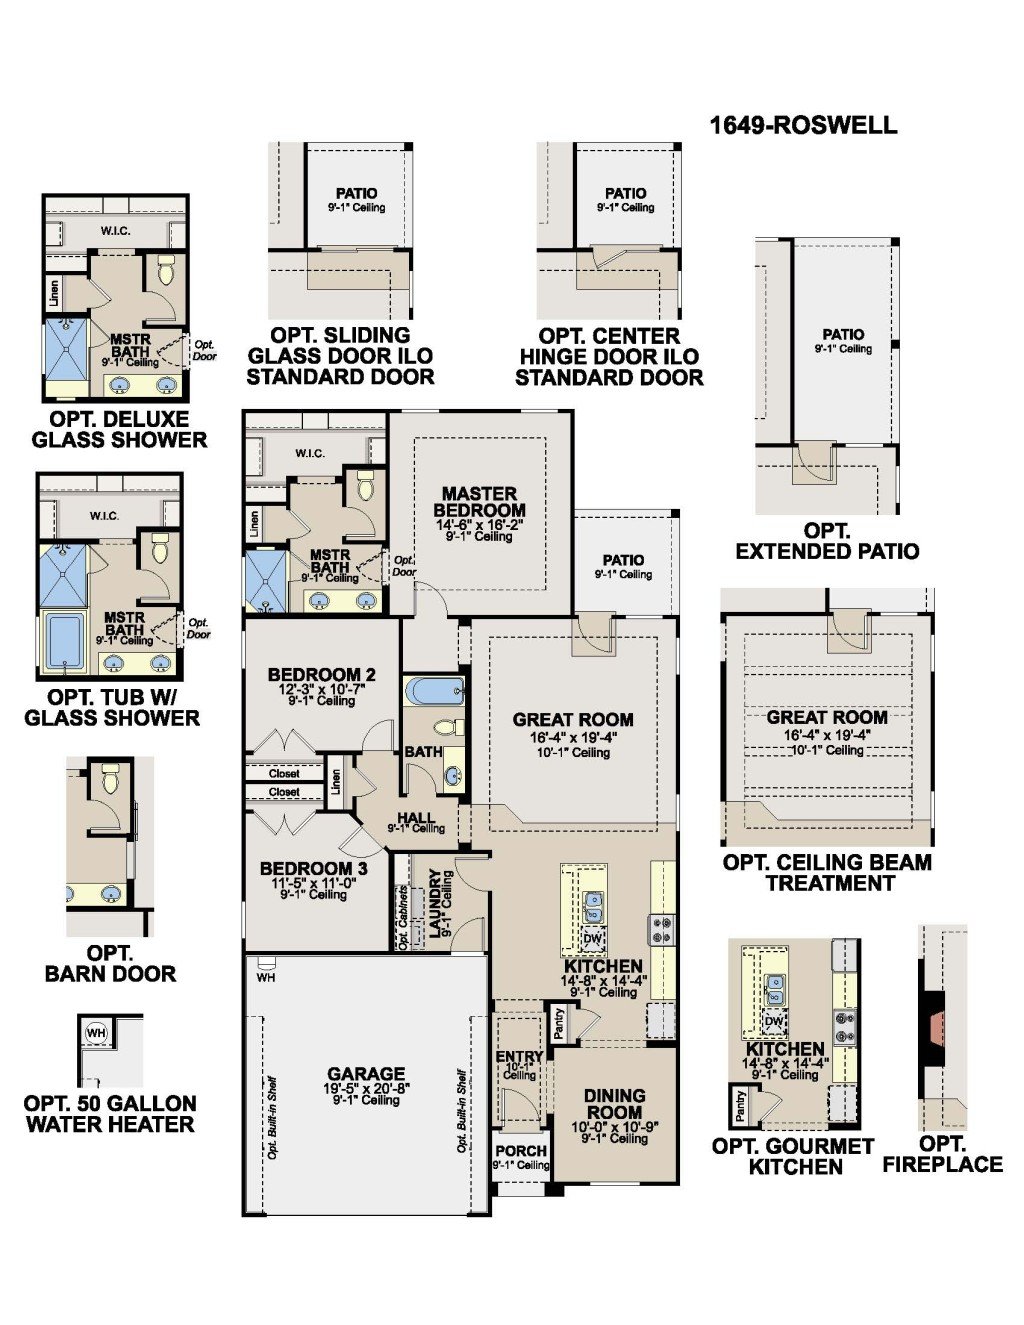 1649 Roswell Home Design Layout